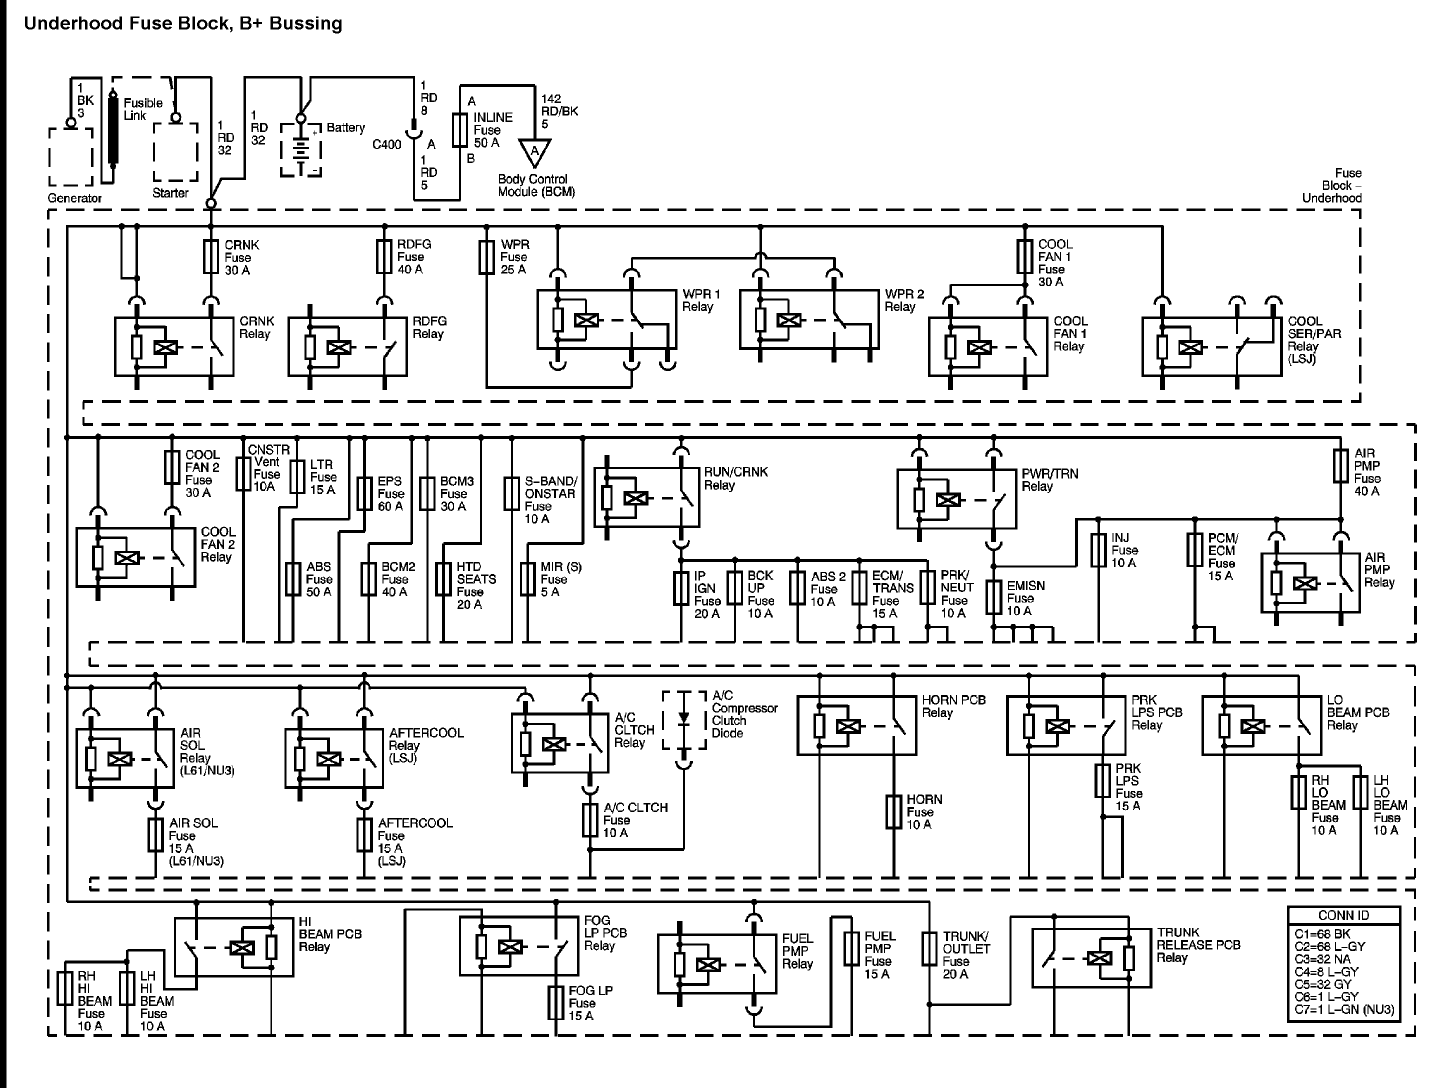 2005 Chevy Impala Stereo Wiring Diagram from lh6.googleusercontent.com